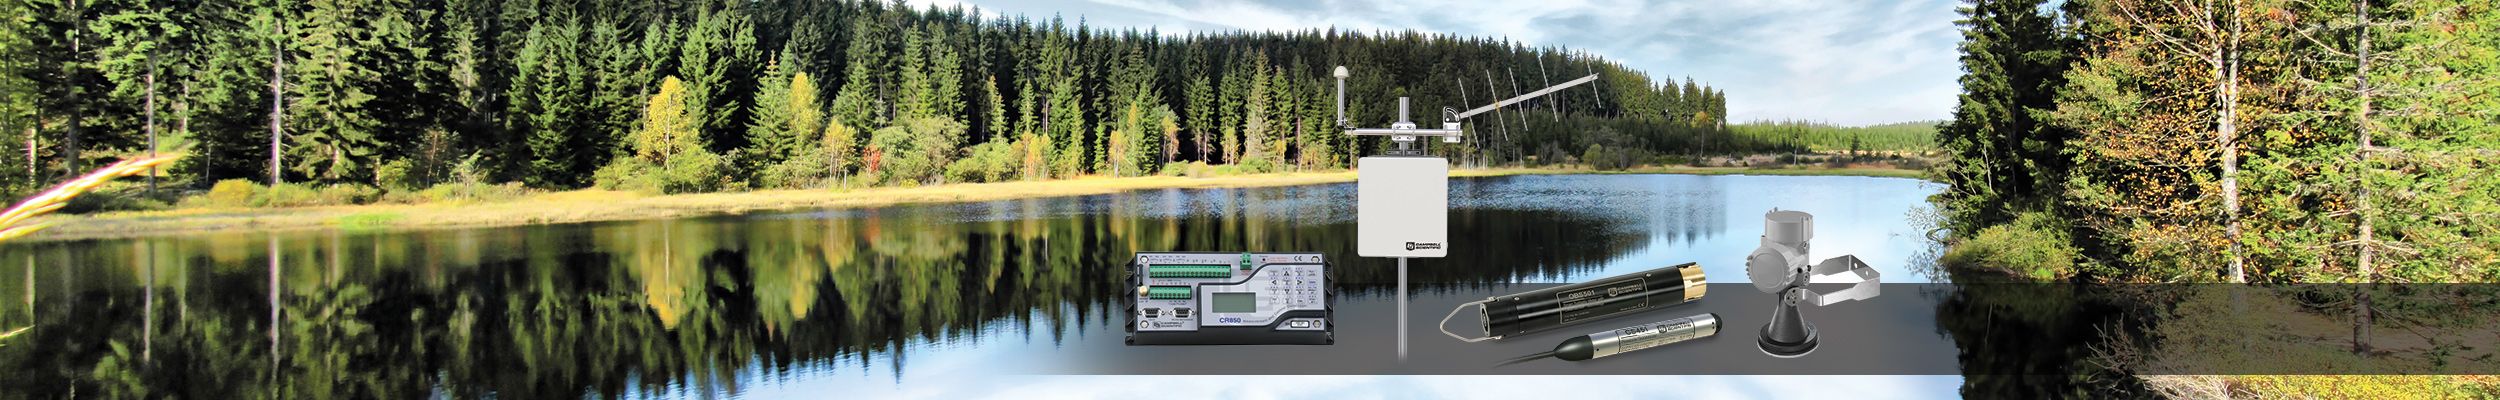 Water Measurement and control systems for water applications